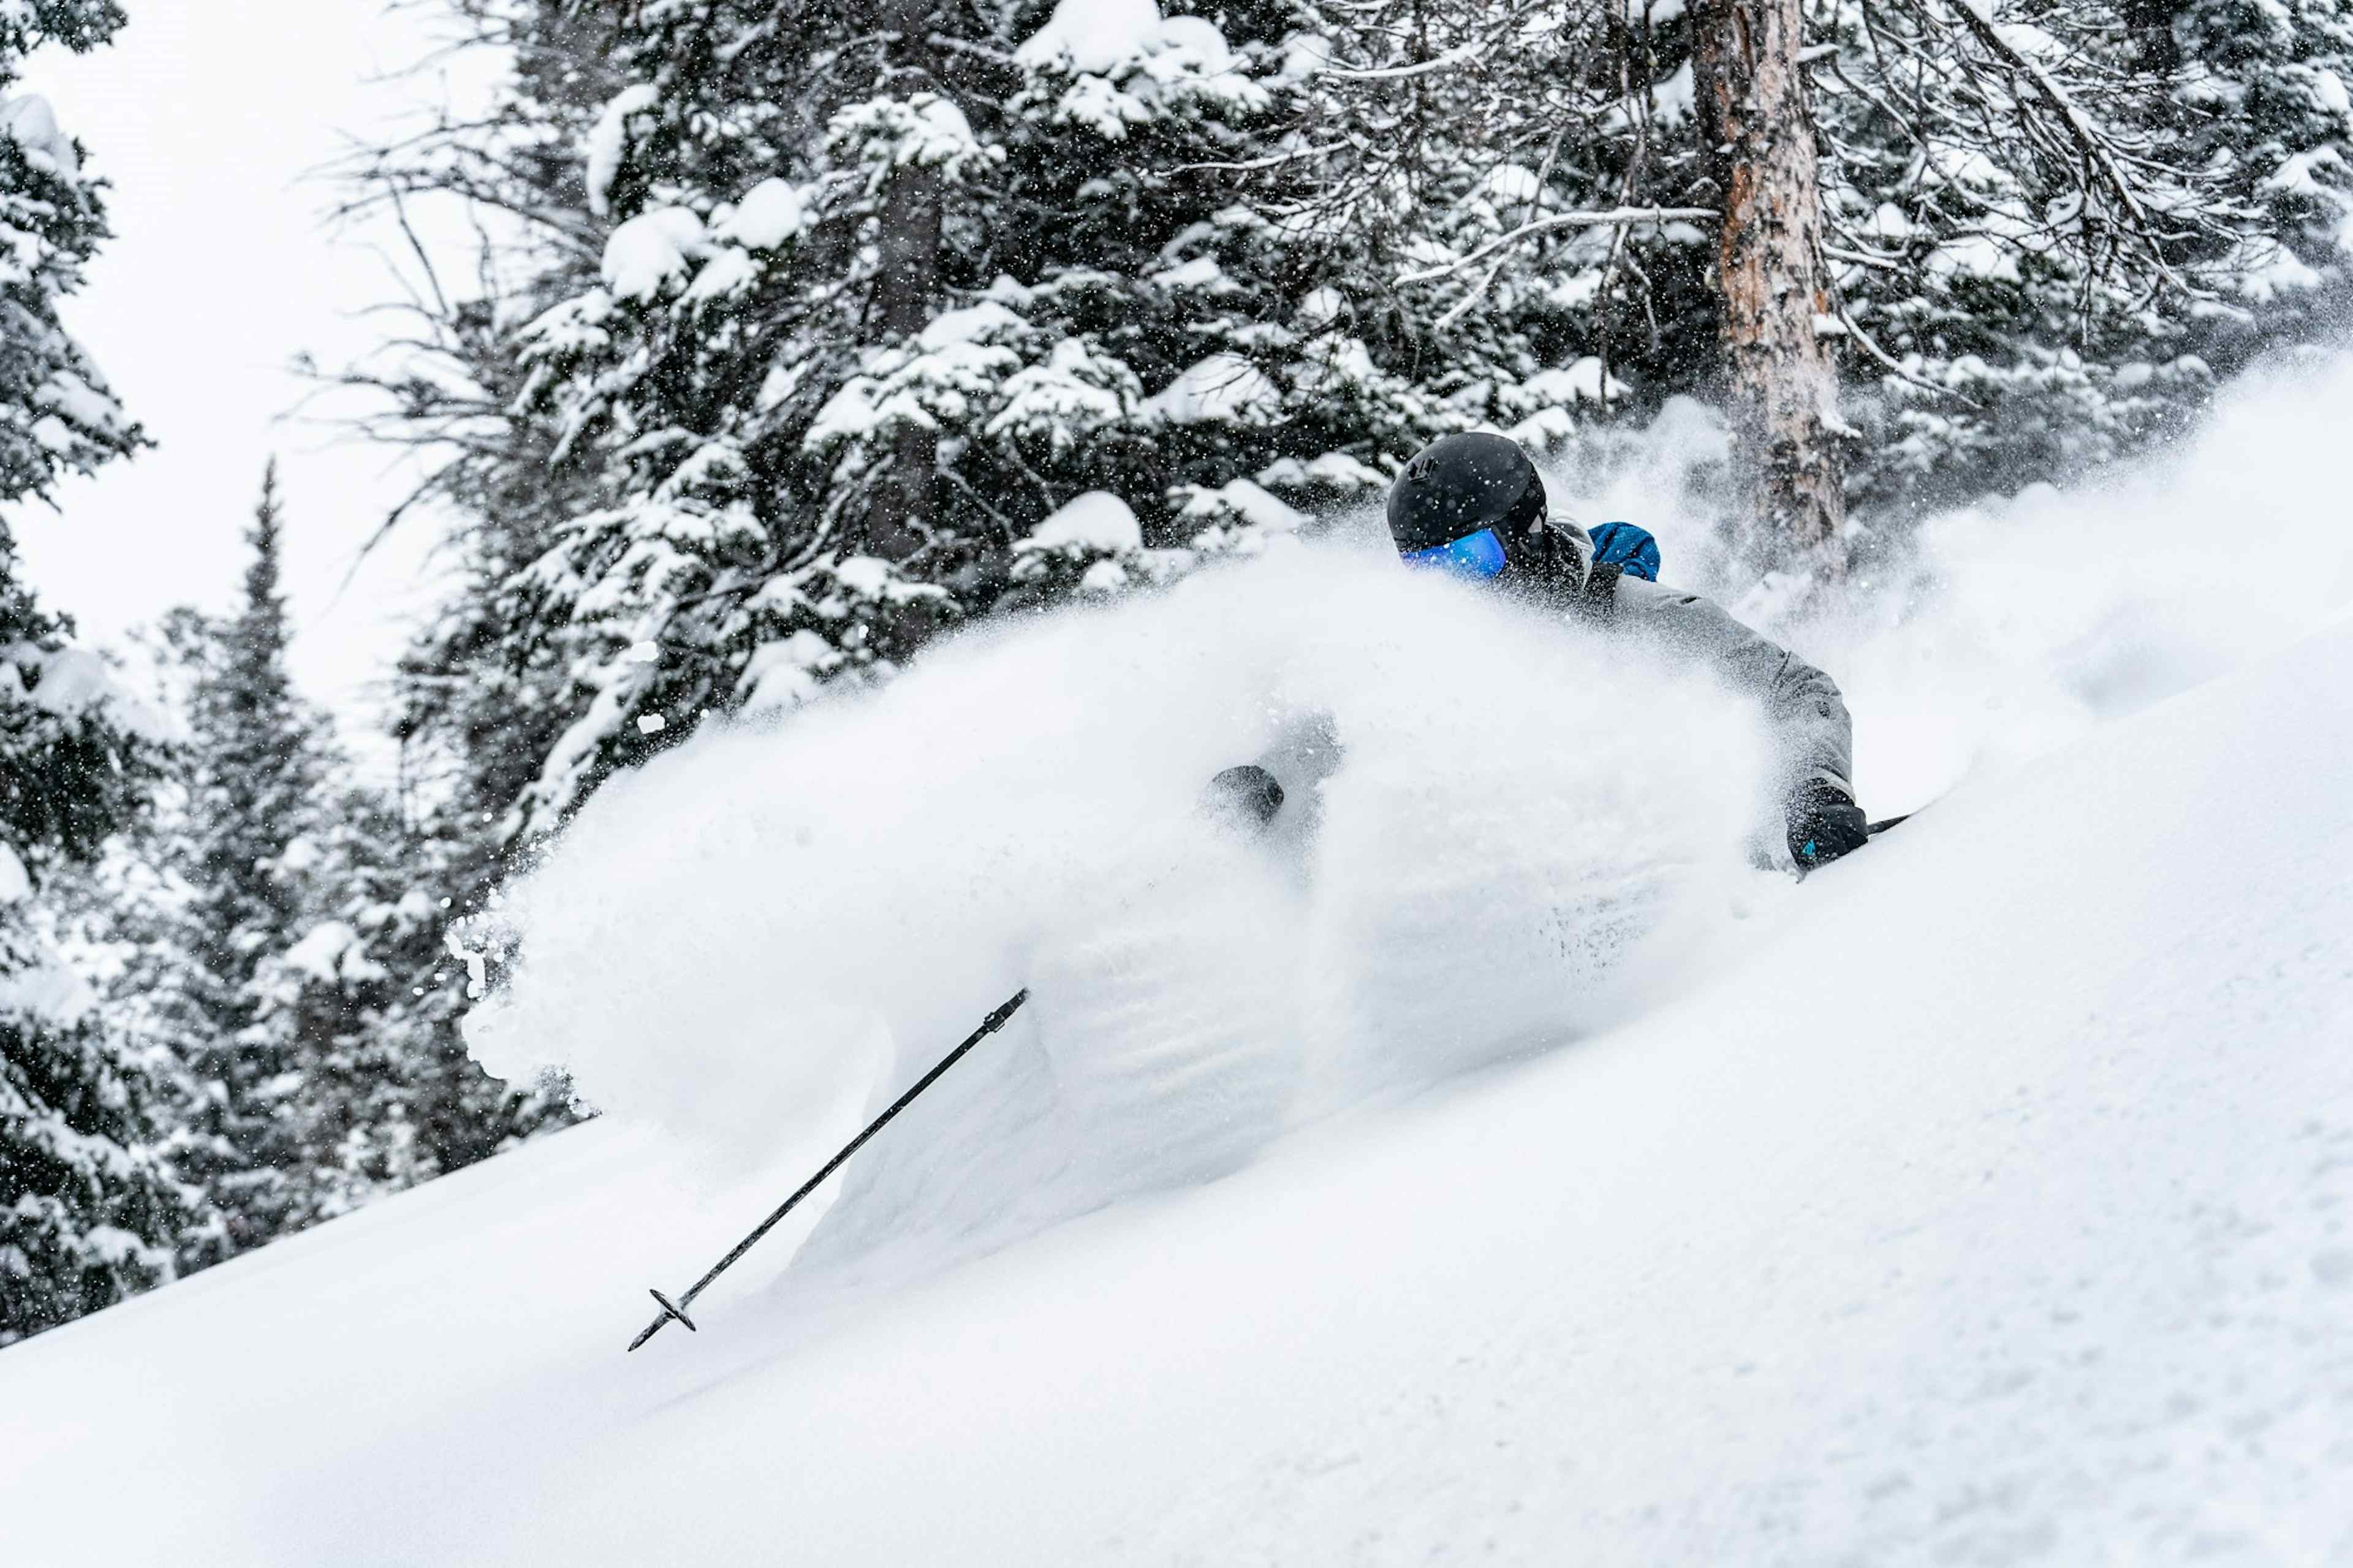 Offering incredible skiing, snowboarding, biking, and access to the backcountry, Grand Targhee Mountain Resort of the Yellowstone Teton Territory has it all. 